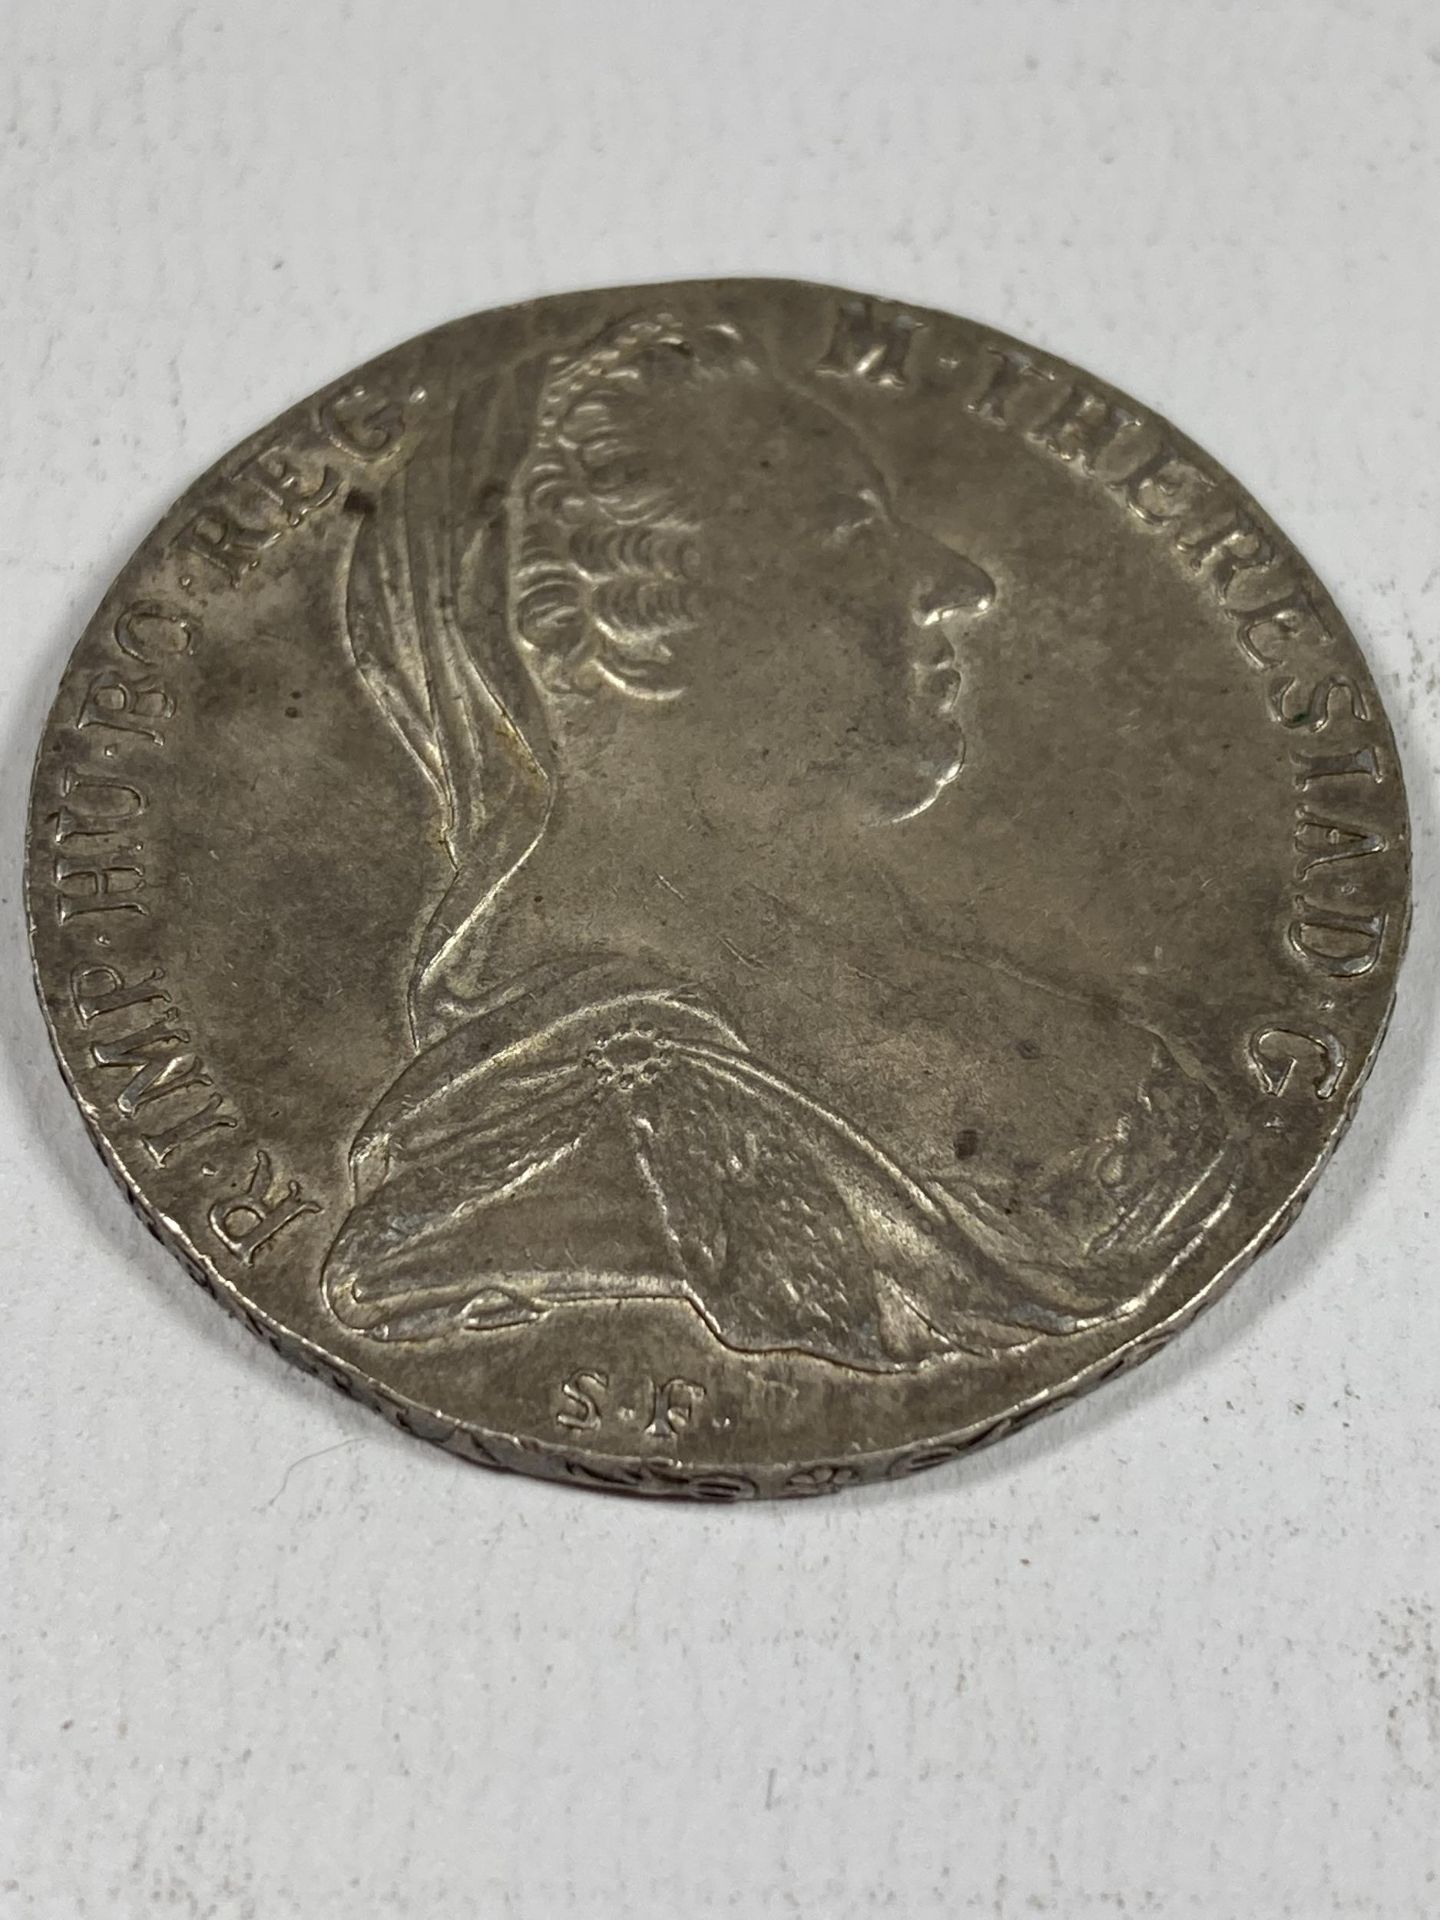 AUSTRIA , 1780 , 1 THALER SILVER MARIA THERESIA COIN . WT. IS 28.2 GMS - Image 2 of 4